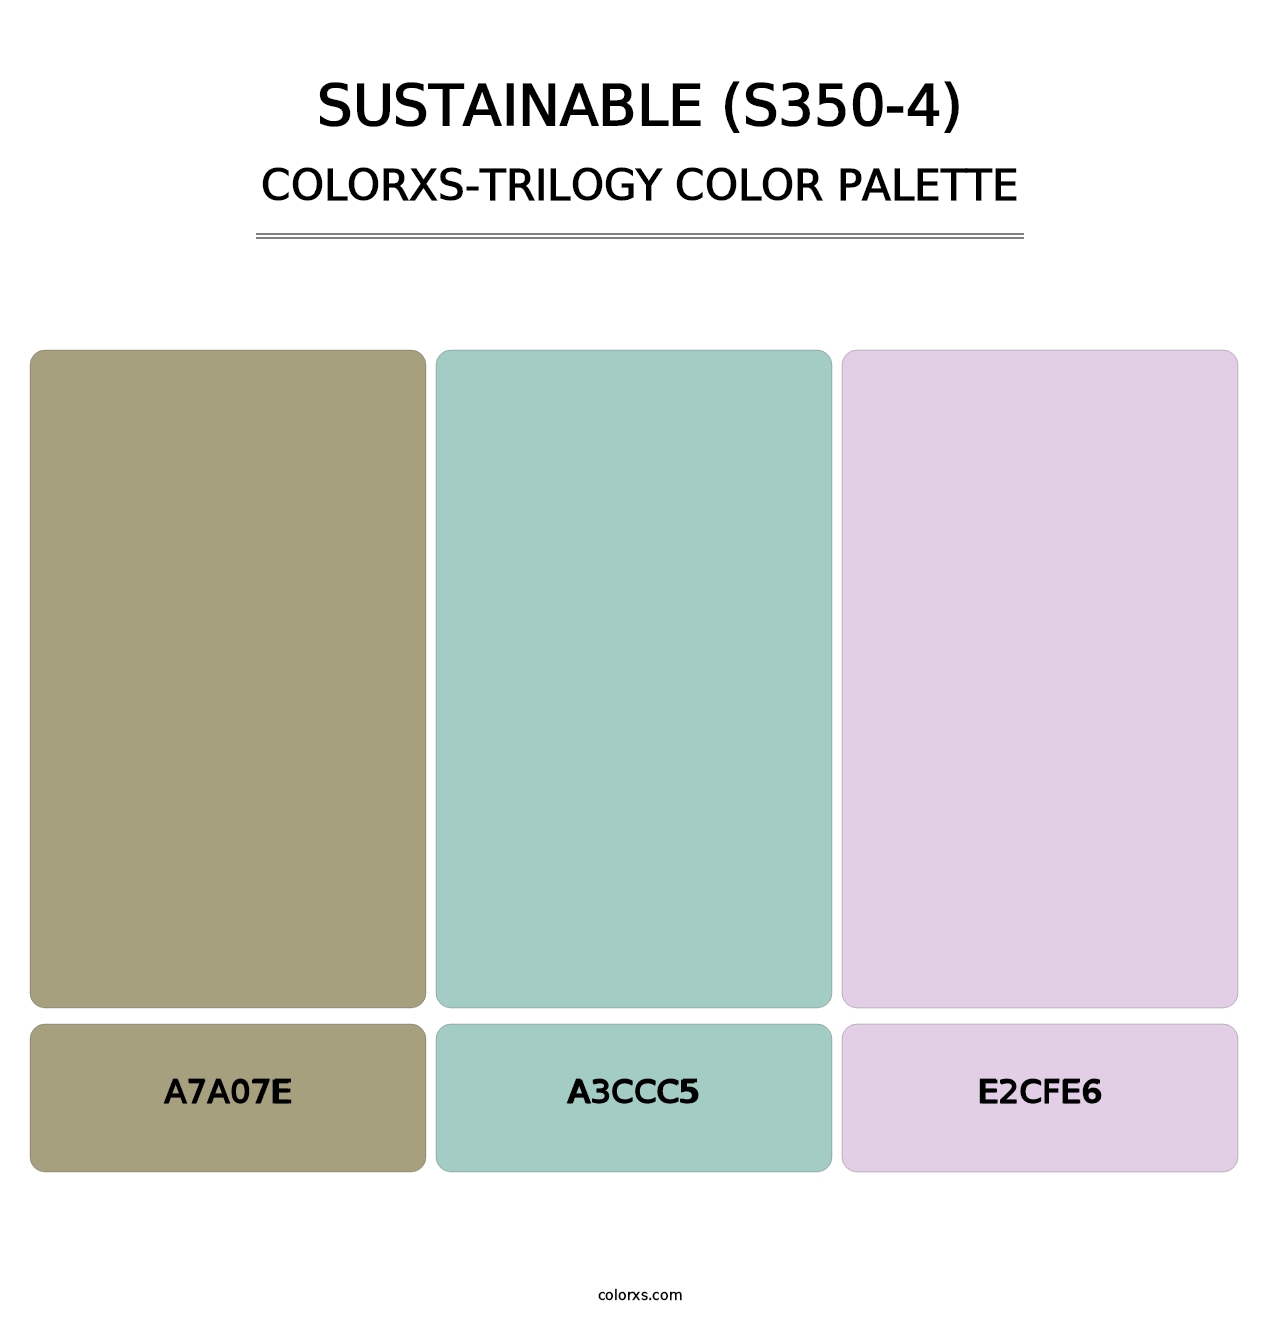 Sustainable (S350-4) - Colorxs Trilogy Palette